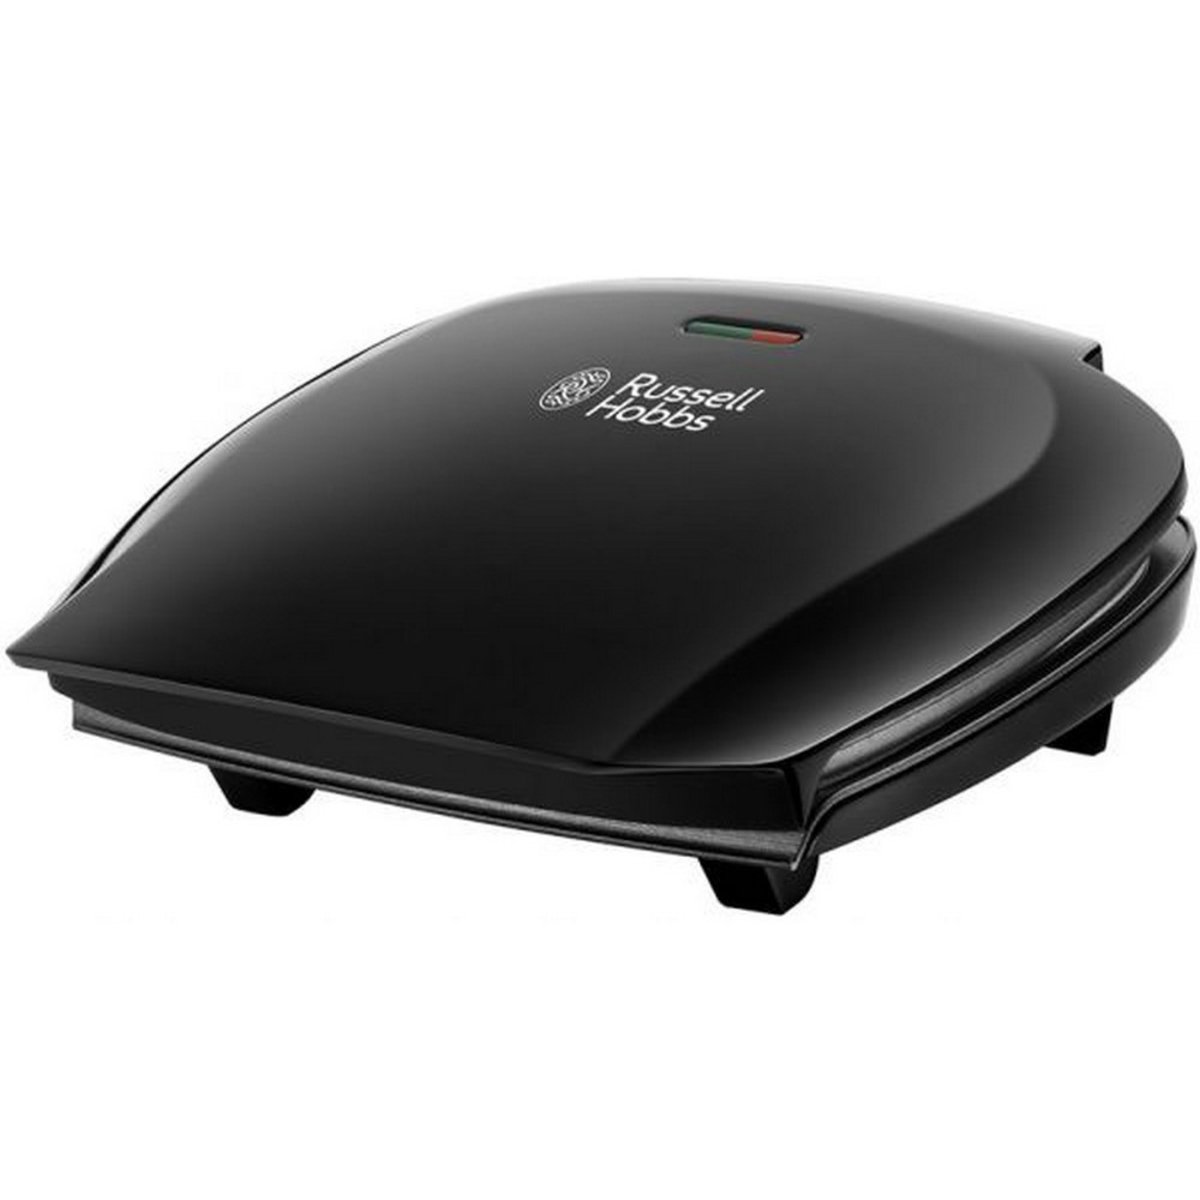 Russell Hobbs Grill 18870